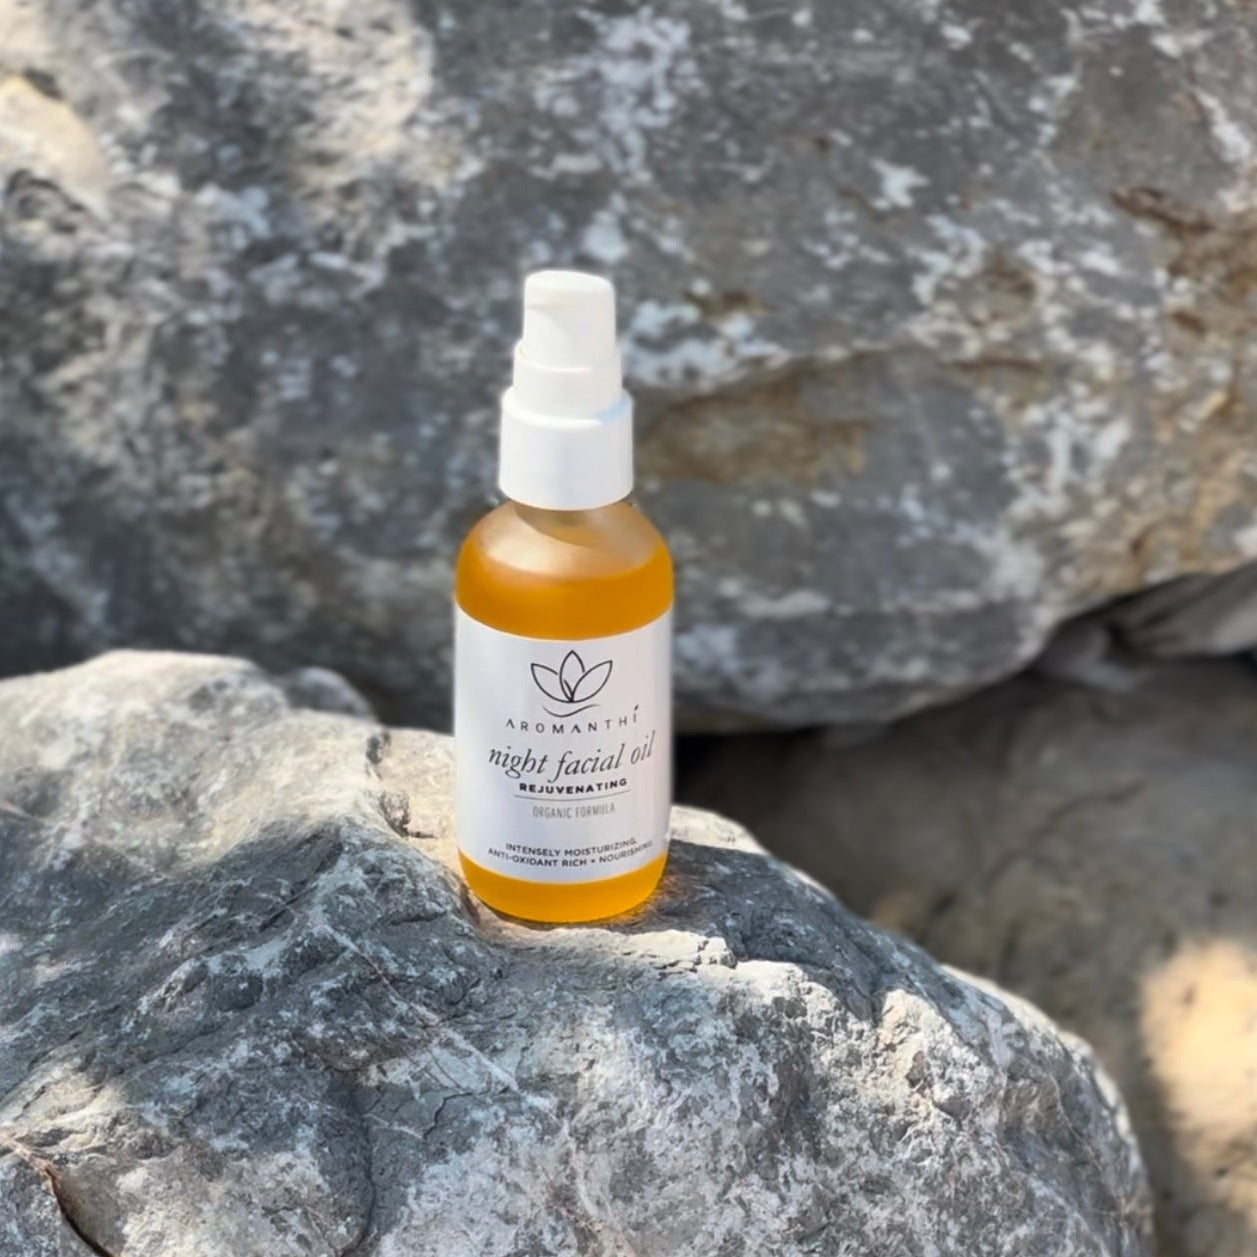 The night facial oil resting on a marble boulder with the sun shining on it